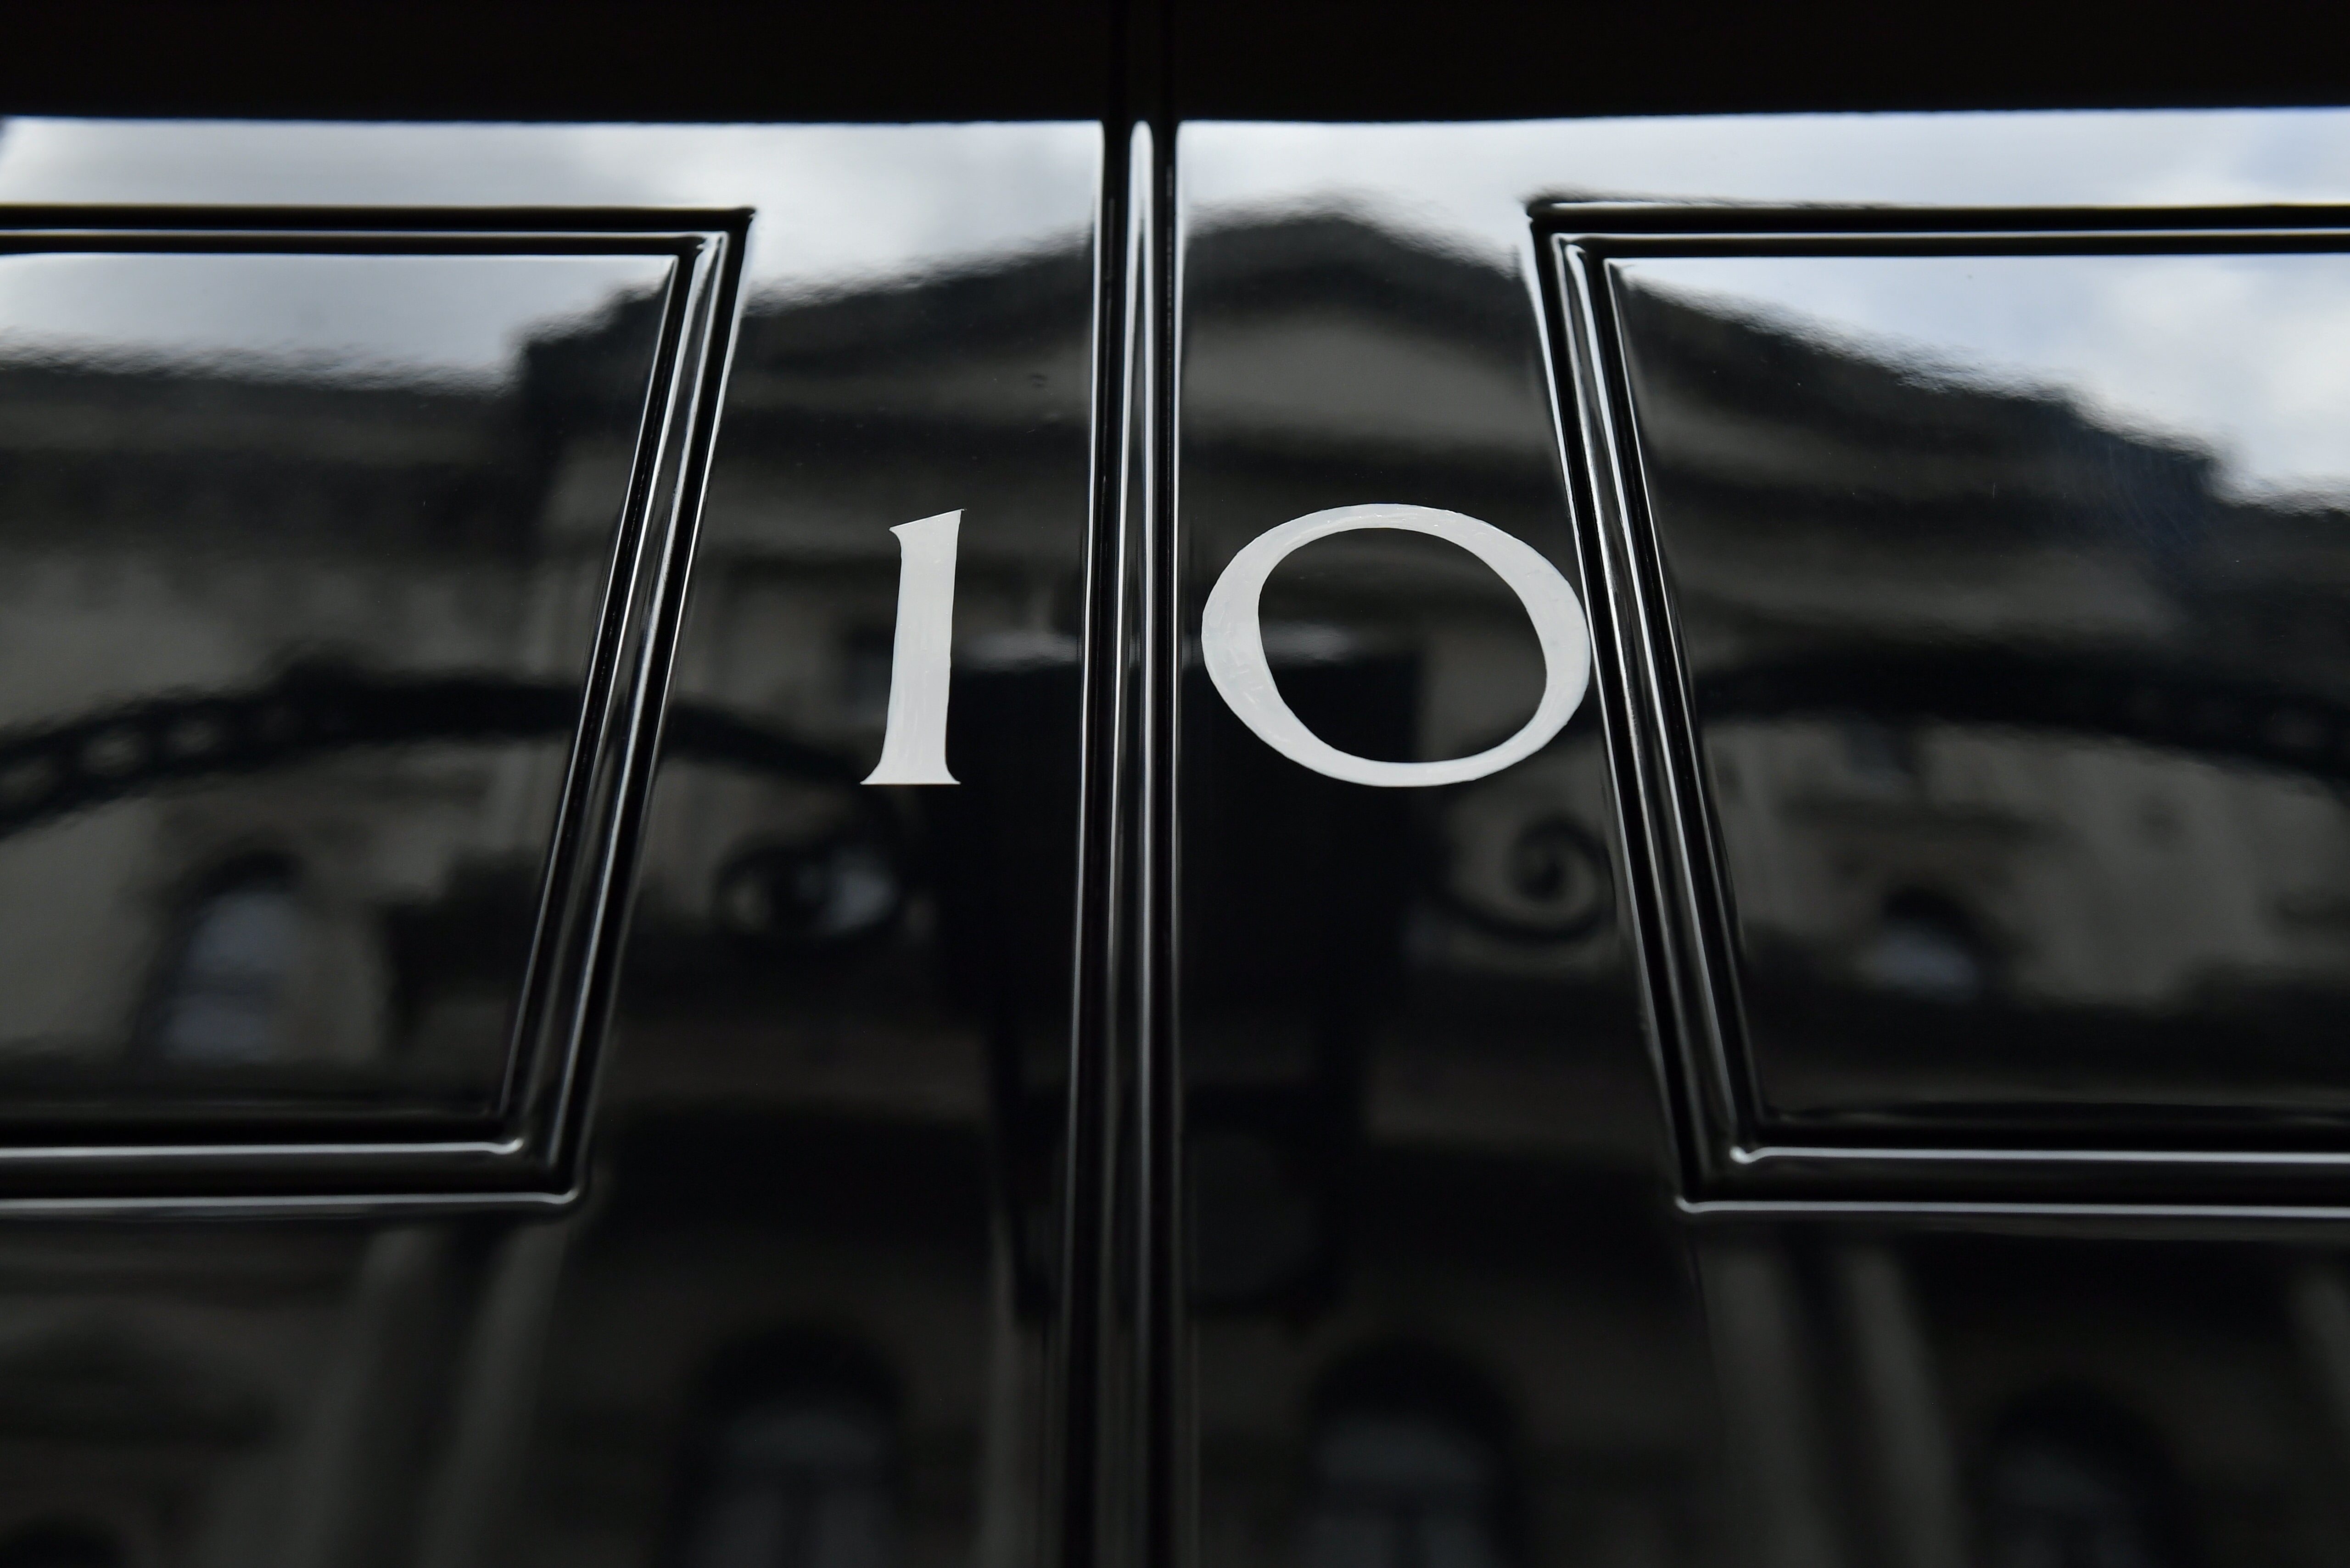 File photo dated 29/10/2019 of the front door of number 10 Downing Street in London. People who attended alleged lockdown-breaking parties at Downing Street and the Cabinet Office are reportedly braced for an initial tranche of fines from the Metropolitan Police. The Guardian has suggested the fixed penalty notices (FPNs) will be issued “imminently”, while other outlets have reported they are due to surface soon. The force is investigating 12 events, including as many as six Prime Minister Boris Johnson is said to have attended. Issue date: Tuesday March 29, 2022 (PA)